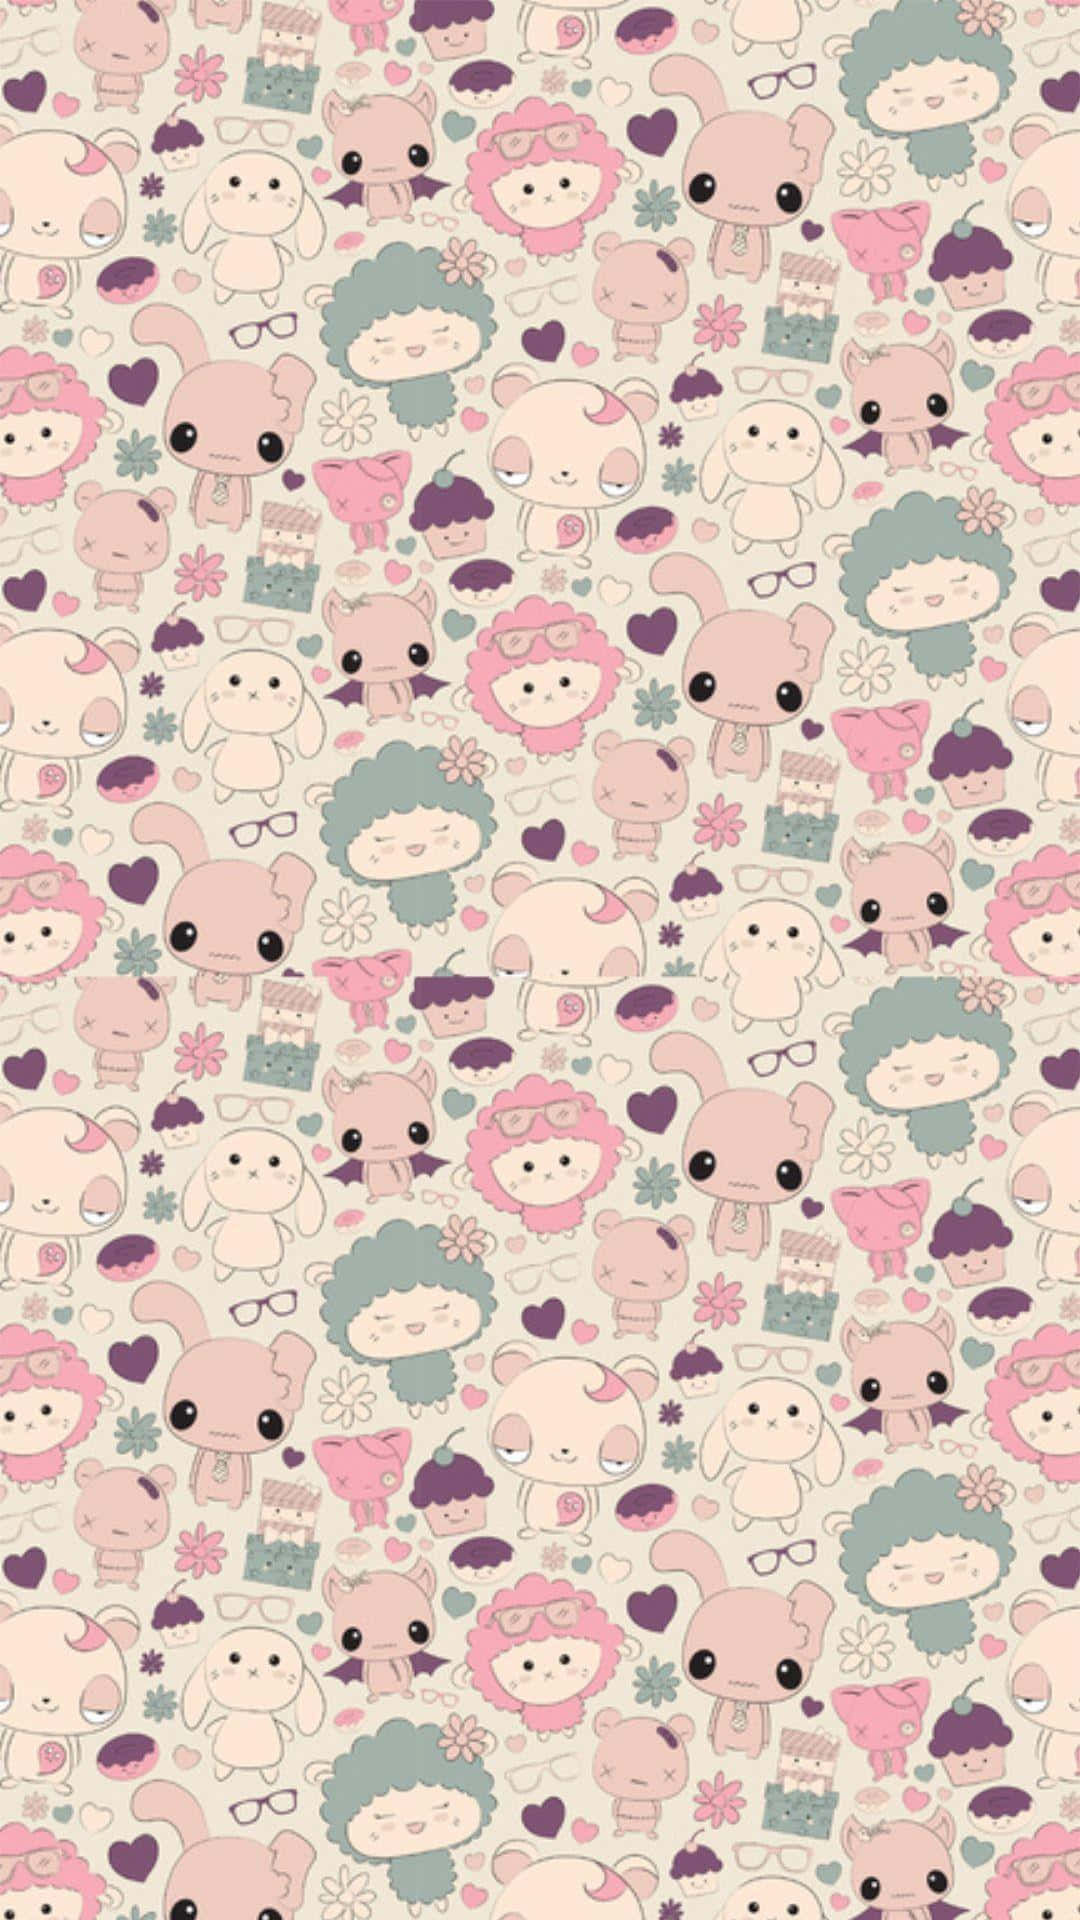 Show Some Love with this Kawaii Valentine Design Wallpaper